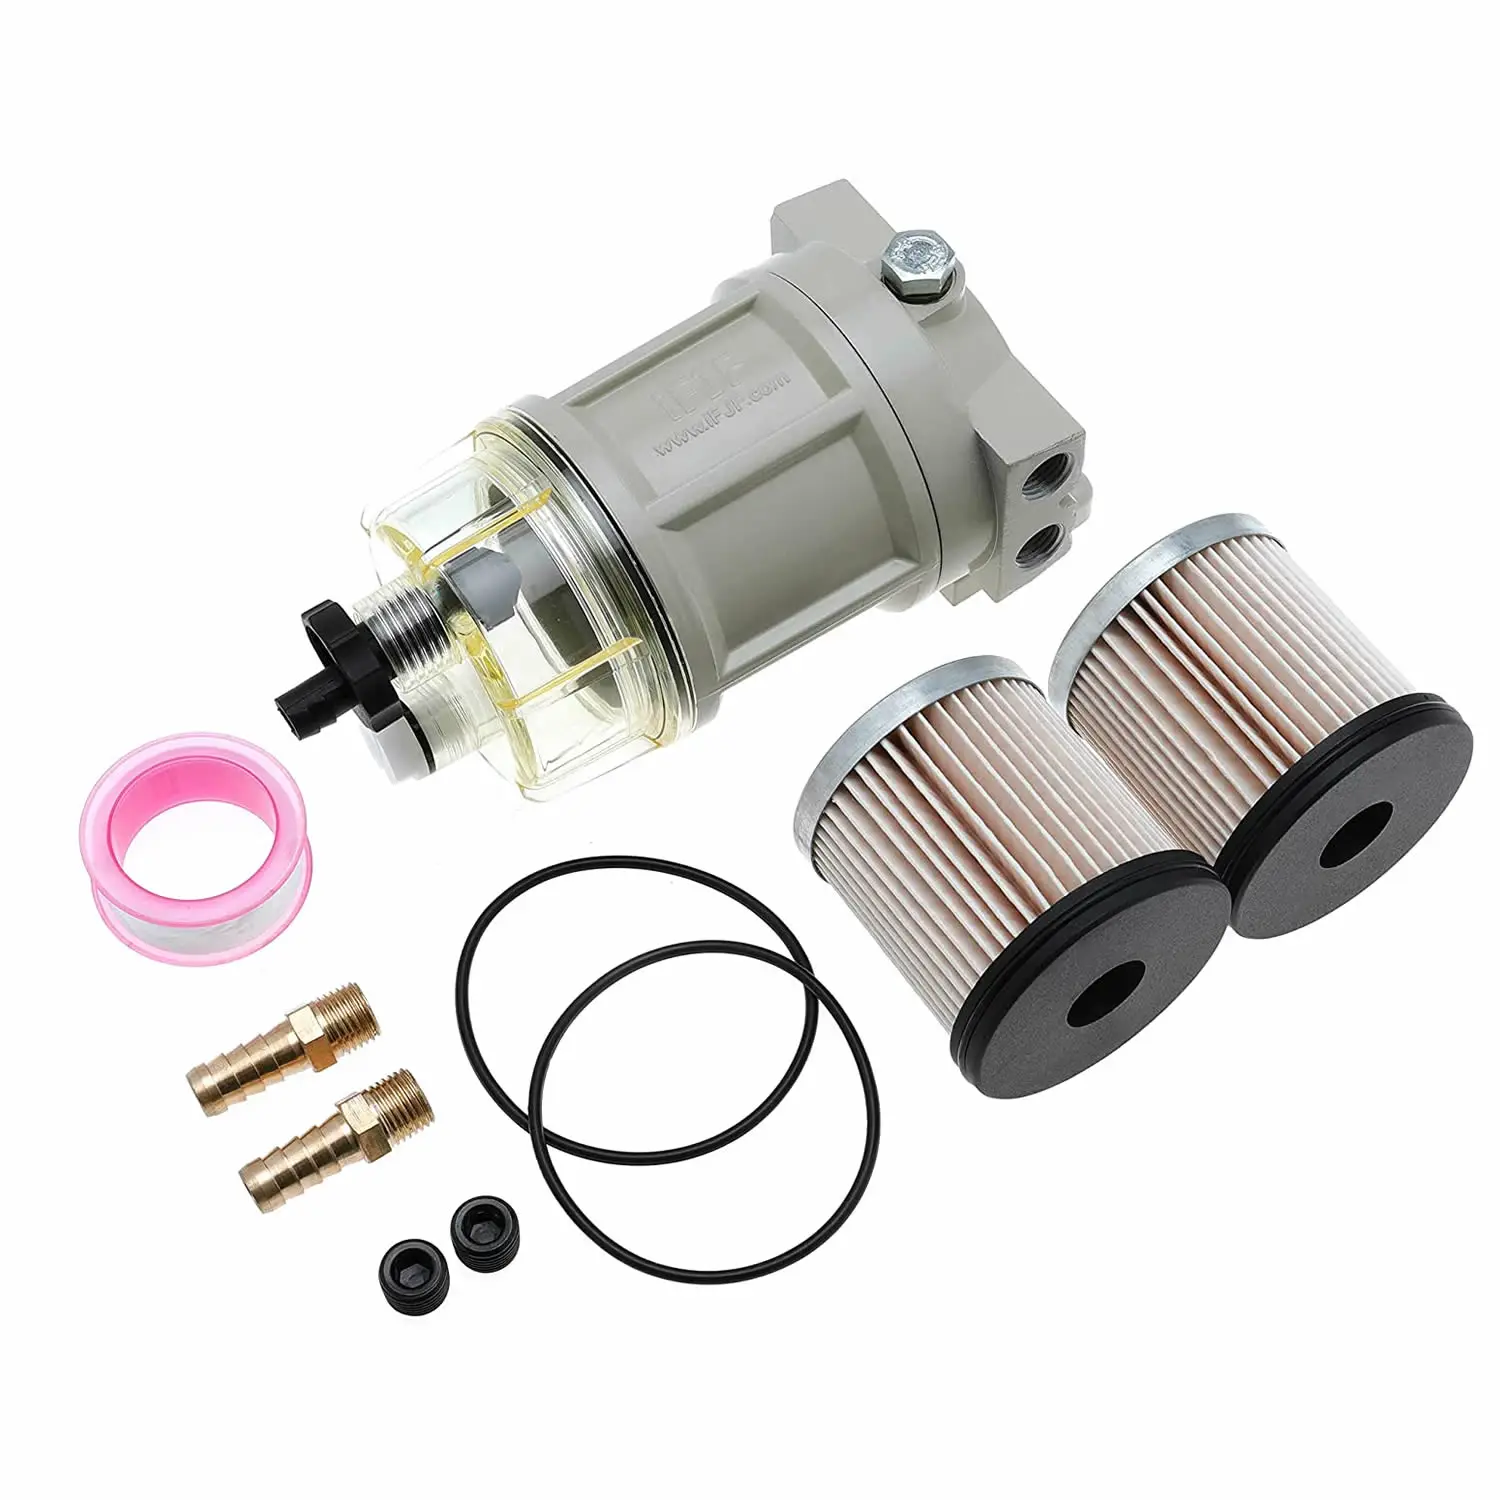 Spin-on Fuel Filter Water Separator 120AT R12T for Boat Marine